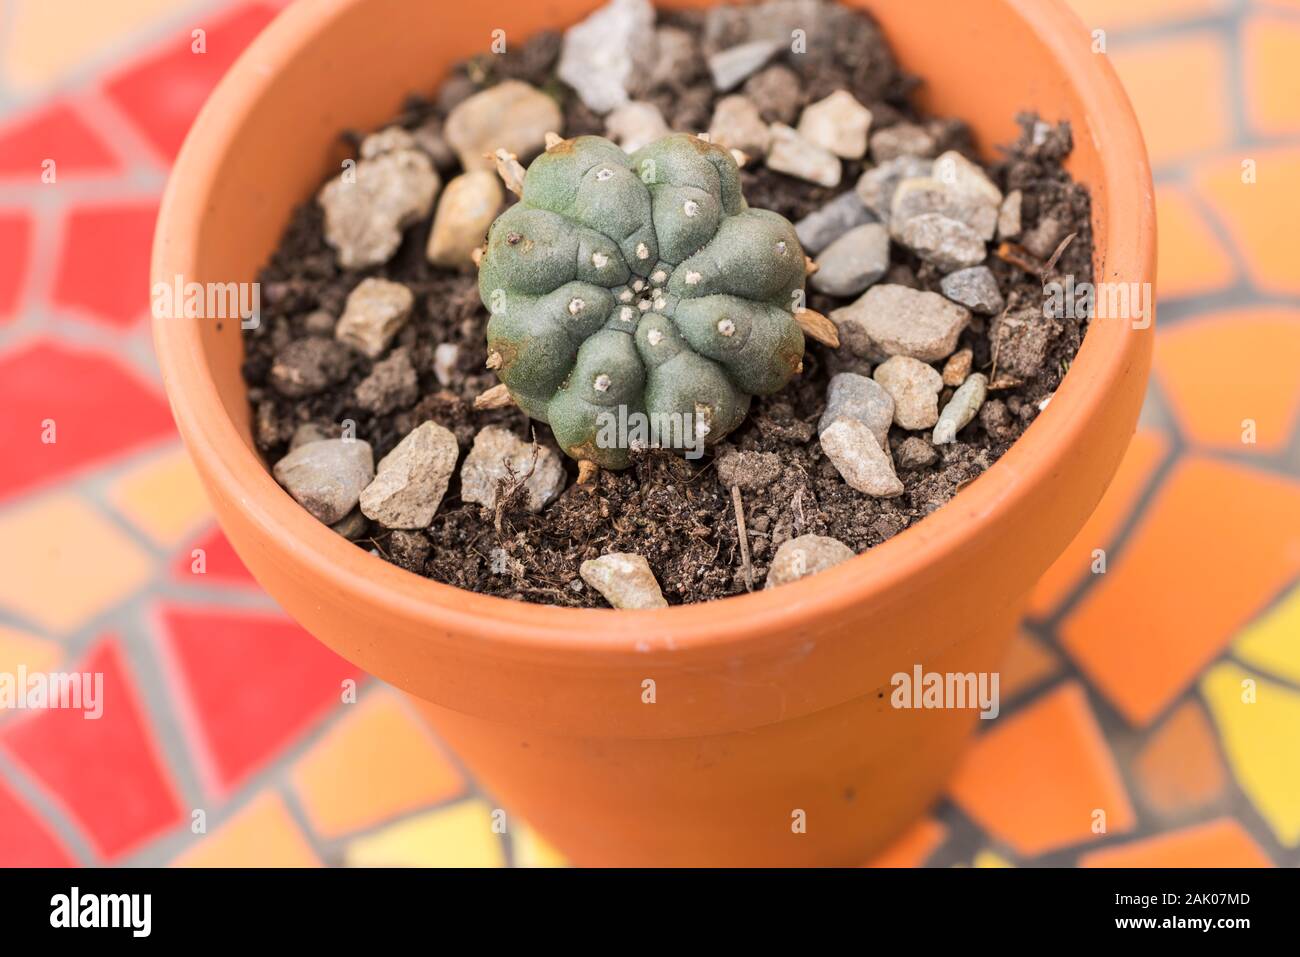 Peyote plant growing in a pot Stock Photo